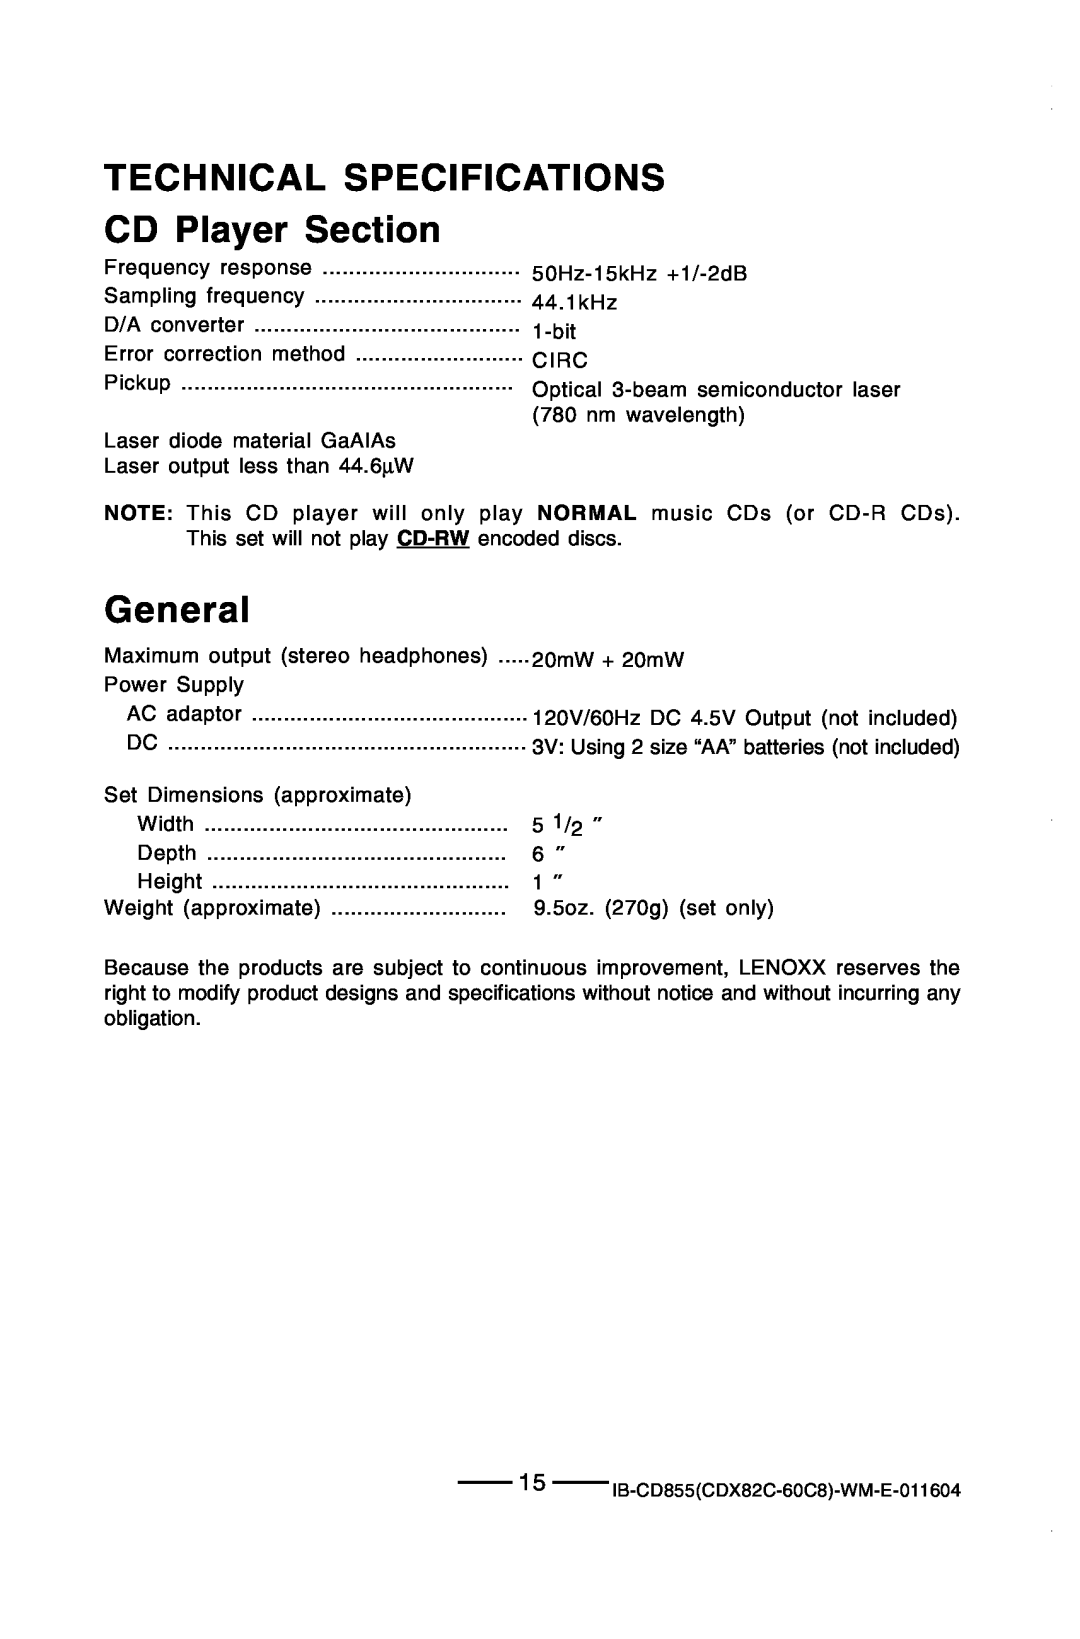 Durabrand CD-855 manual Technical Specifications, CD Player Section, General 